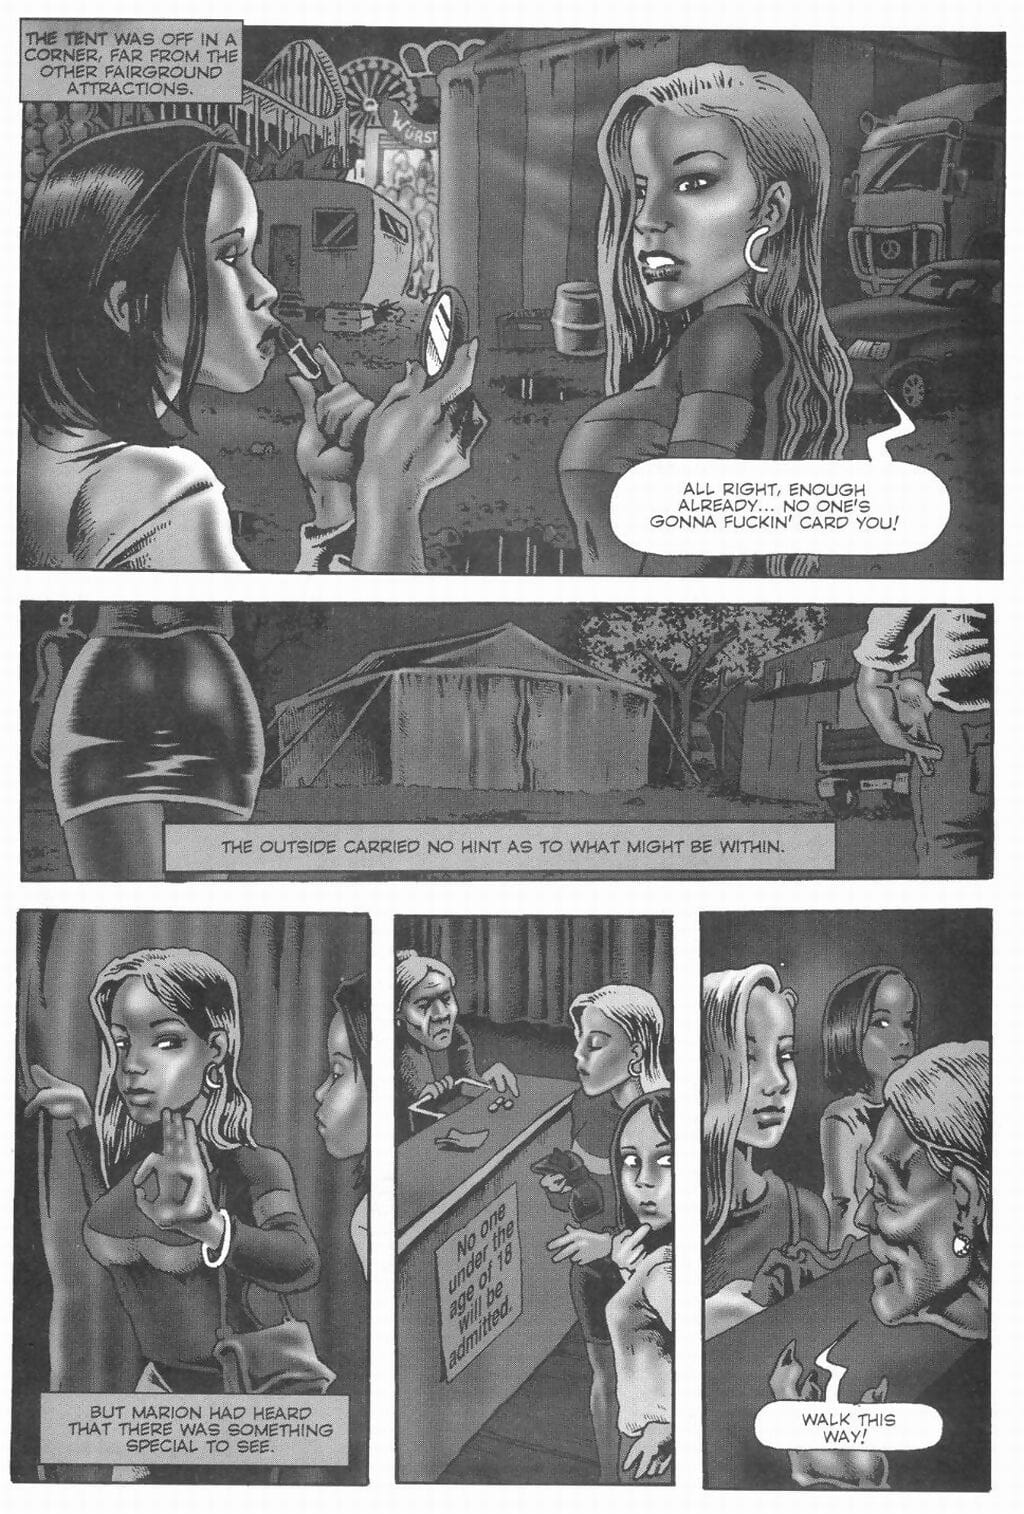 Alraune #1 page 1